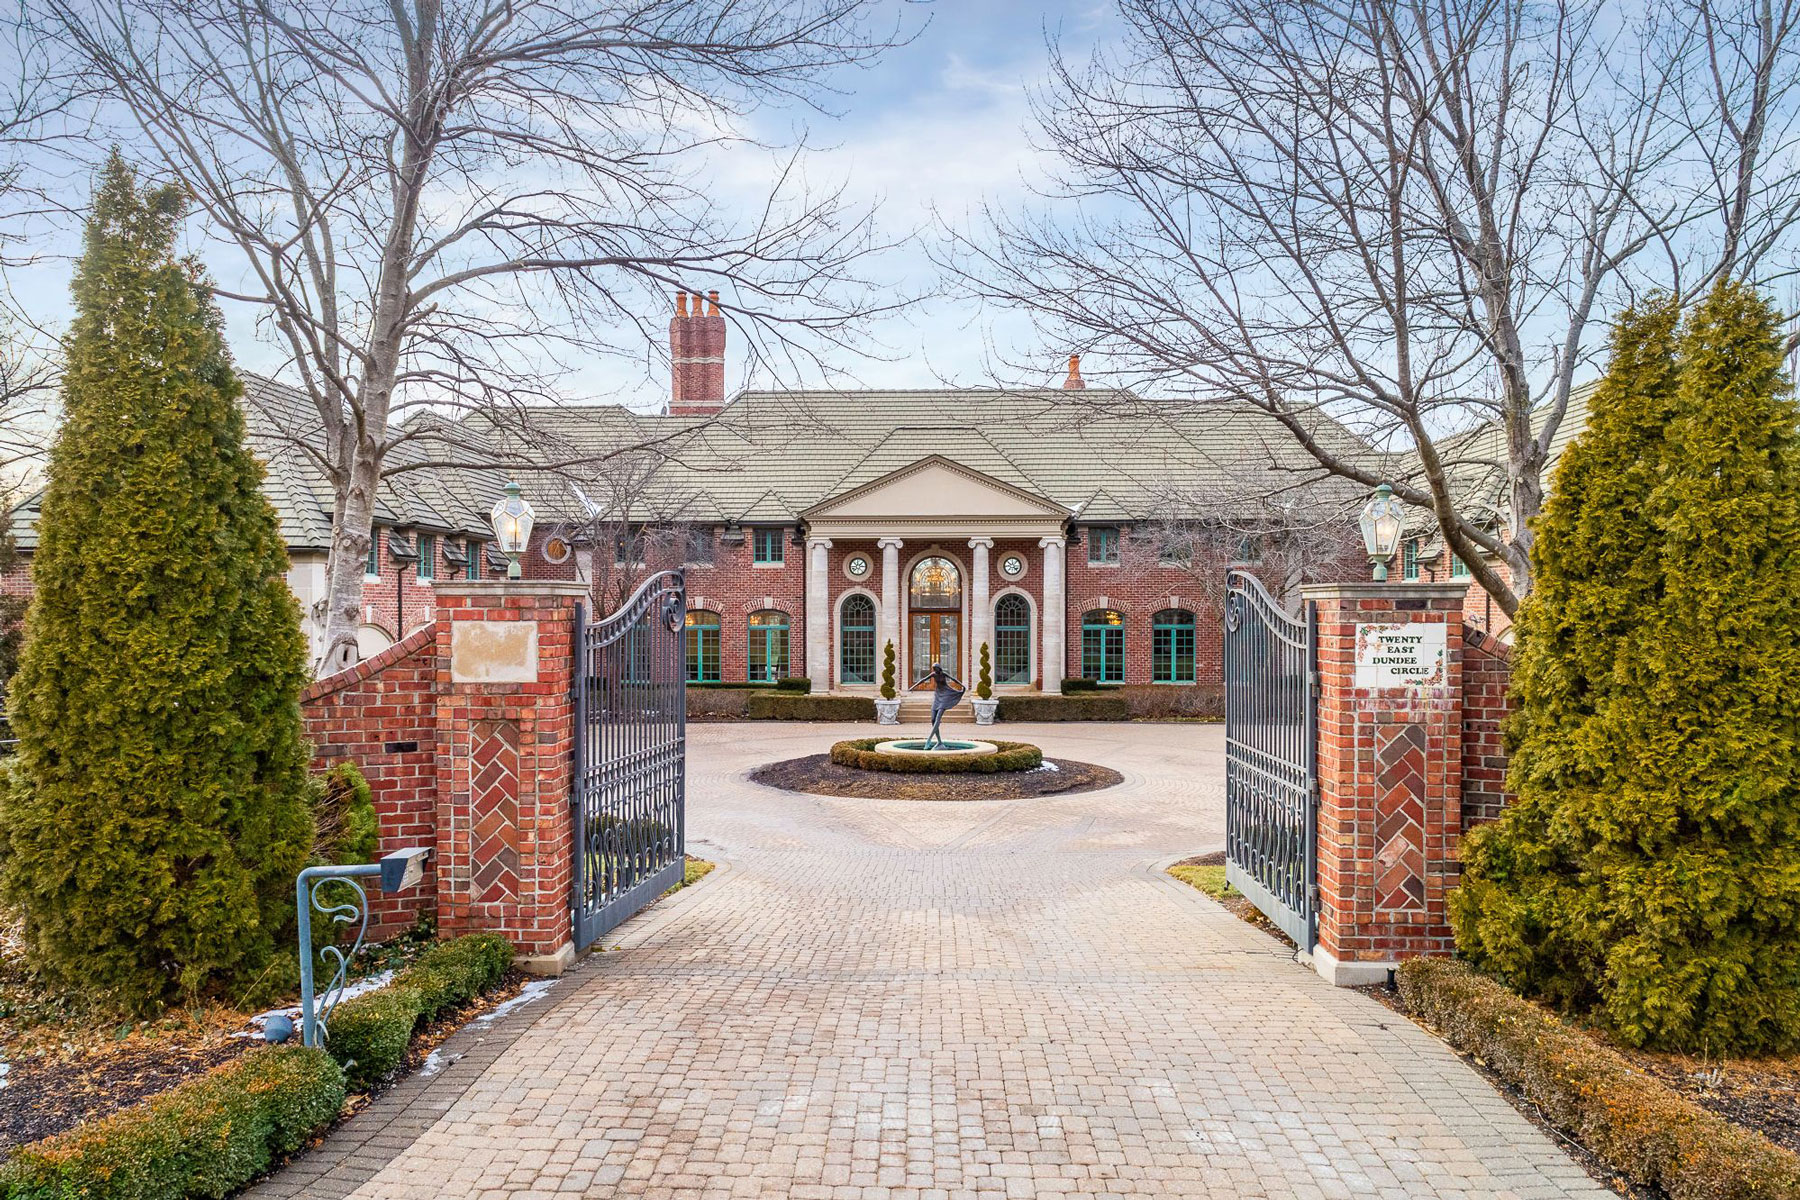 Press Release: One-of-a-Kind Luxury Estate Up For Auction!